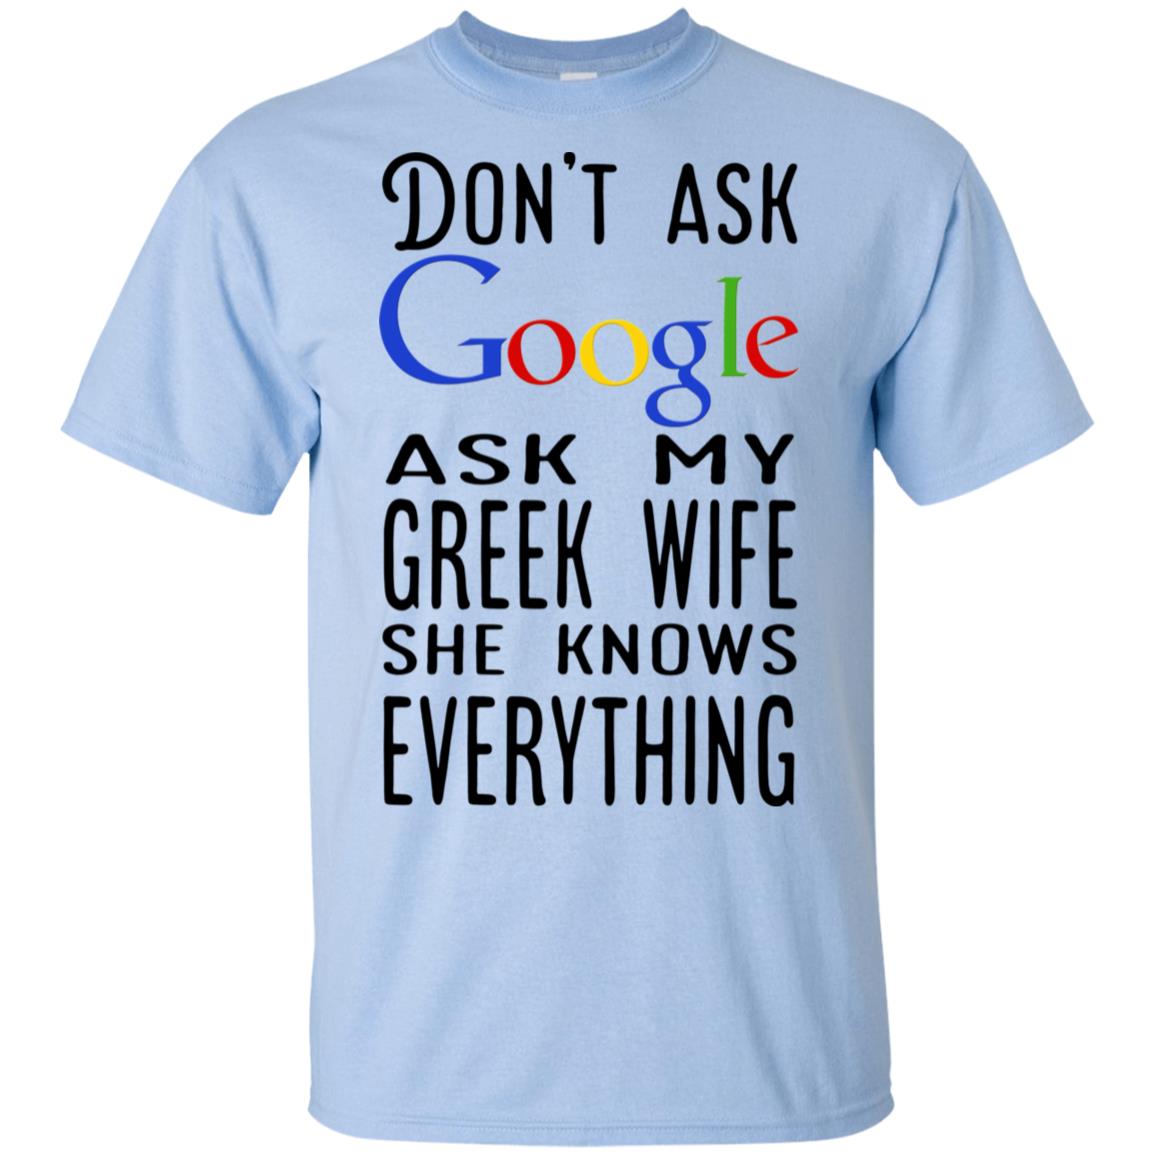 She knows everything. T-Shirt Google. I don't need Google my wife. Don't ask me на футболке. Ask me about my penis t-Shirt.